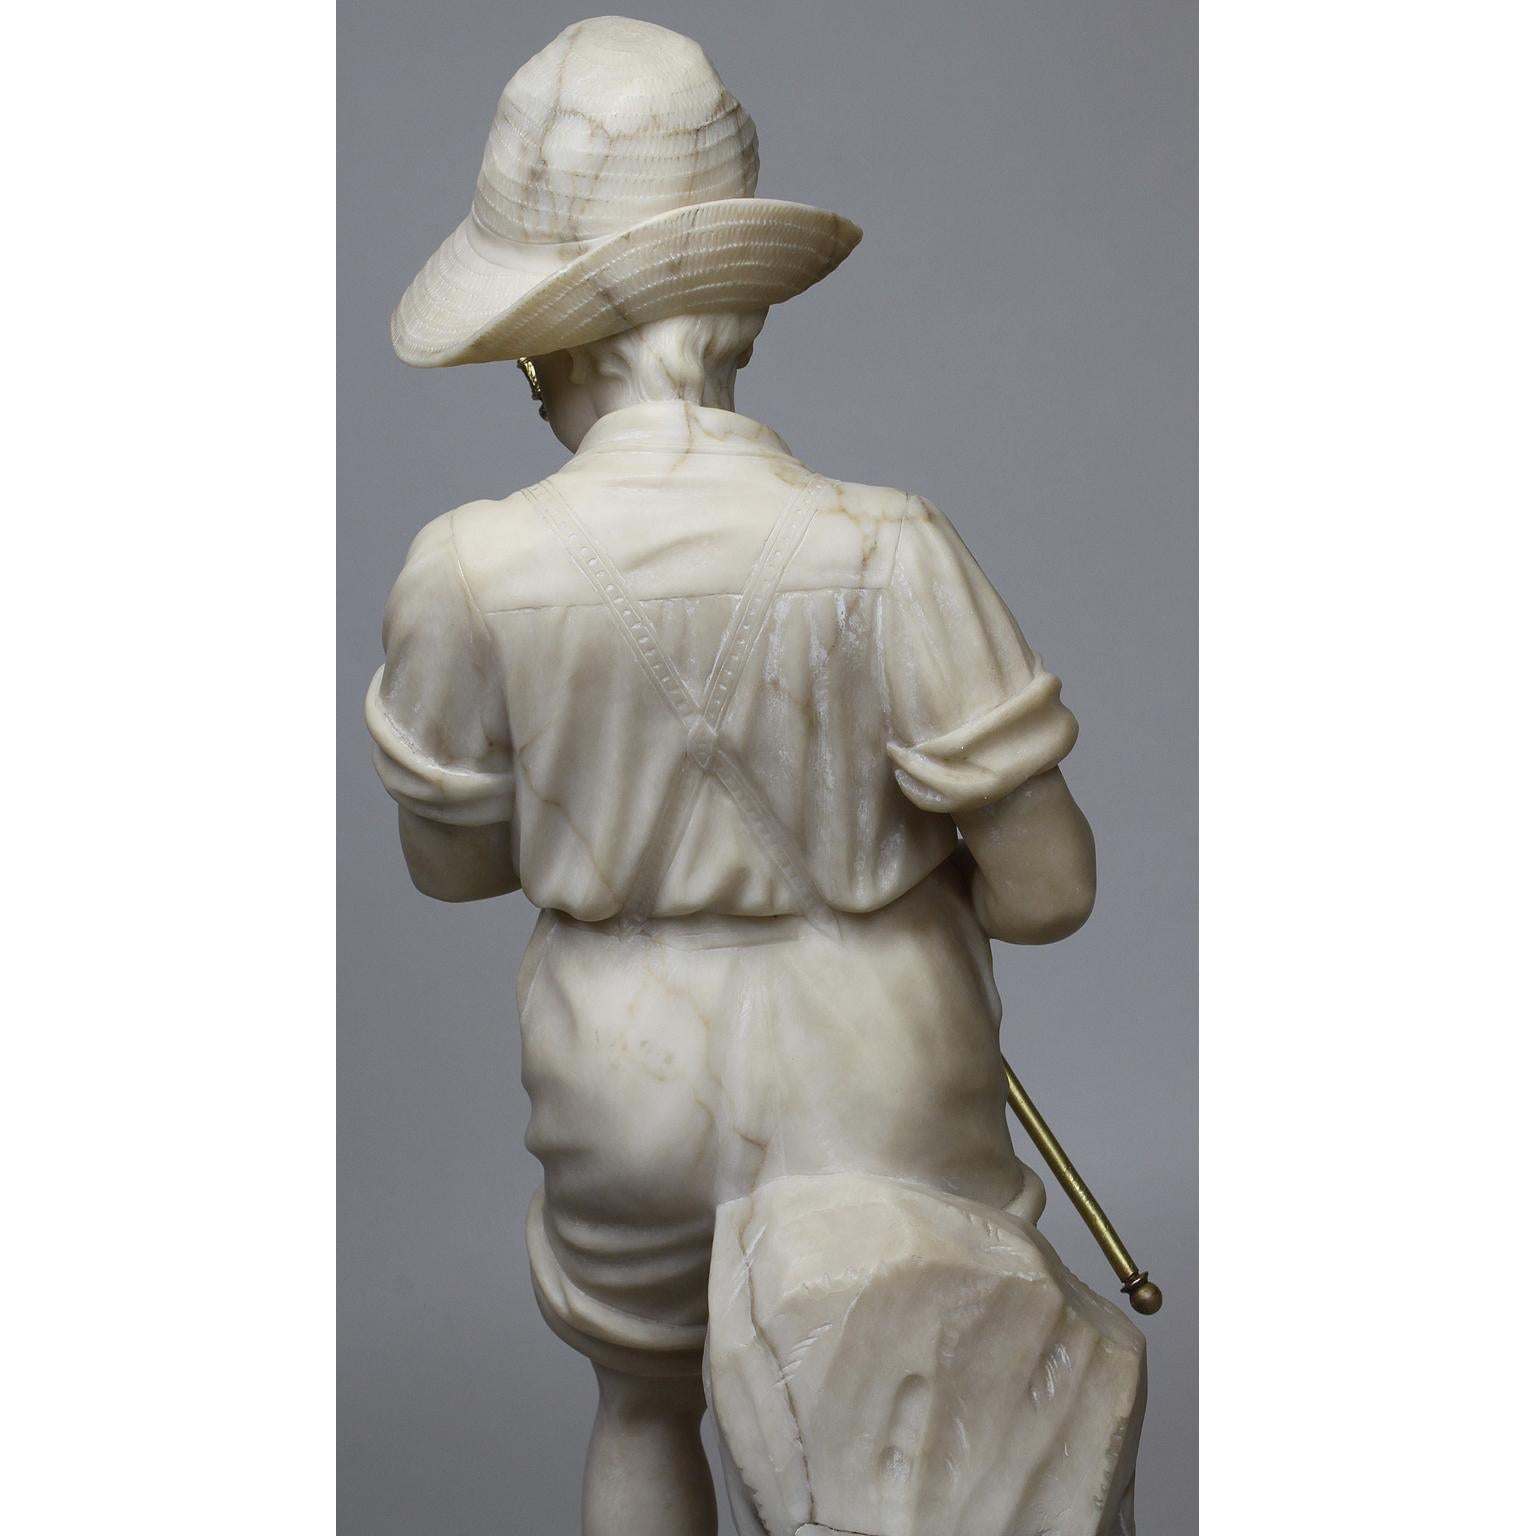 Charming Italian 19th-20th Century Carved Alabaster Figure of a Fisher Boy For Sale 6